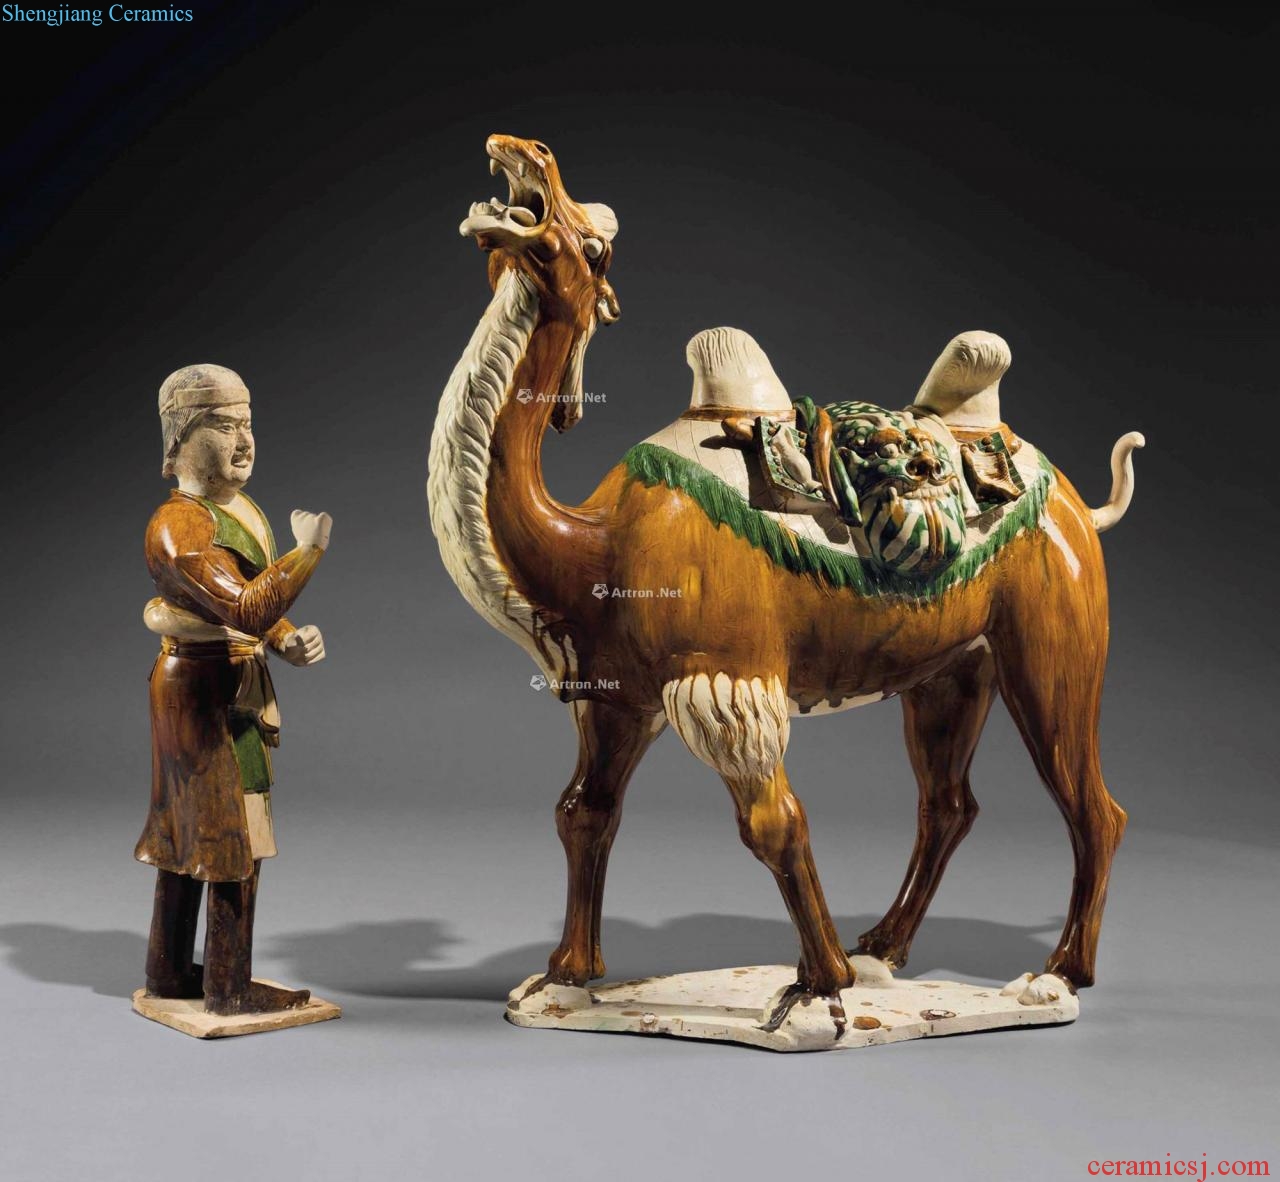 The tang dynasty (618-907), A MAGNIFICENT SANCAI - GLAZED POTTERY FIGURE OF A BACTRIAN CAMEL AND A FOREIGN unapologetically